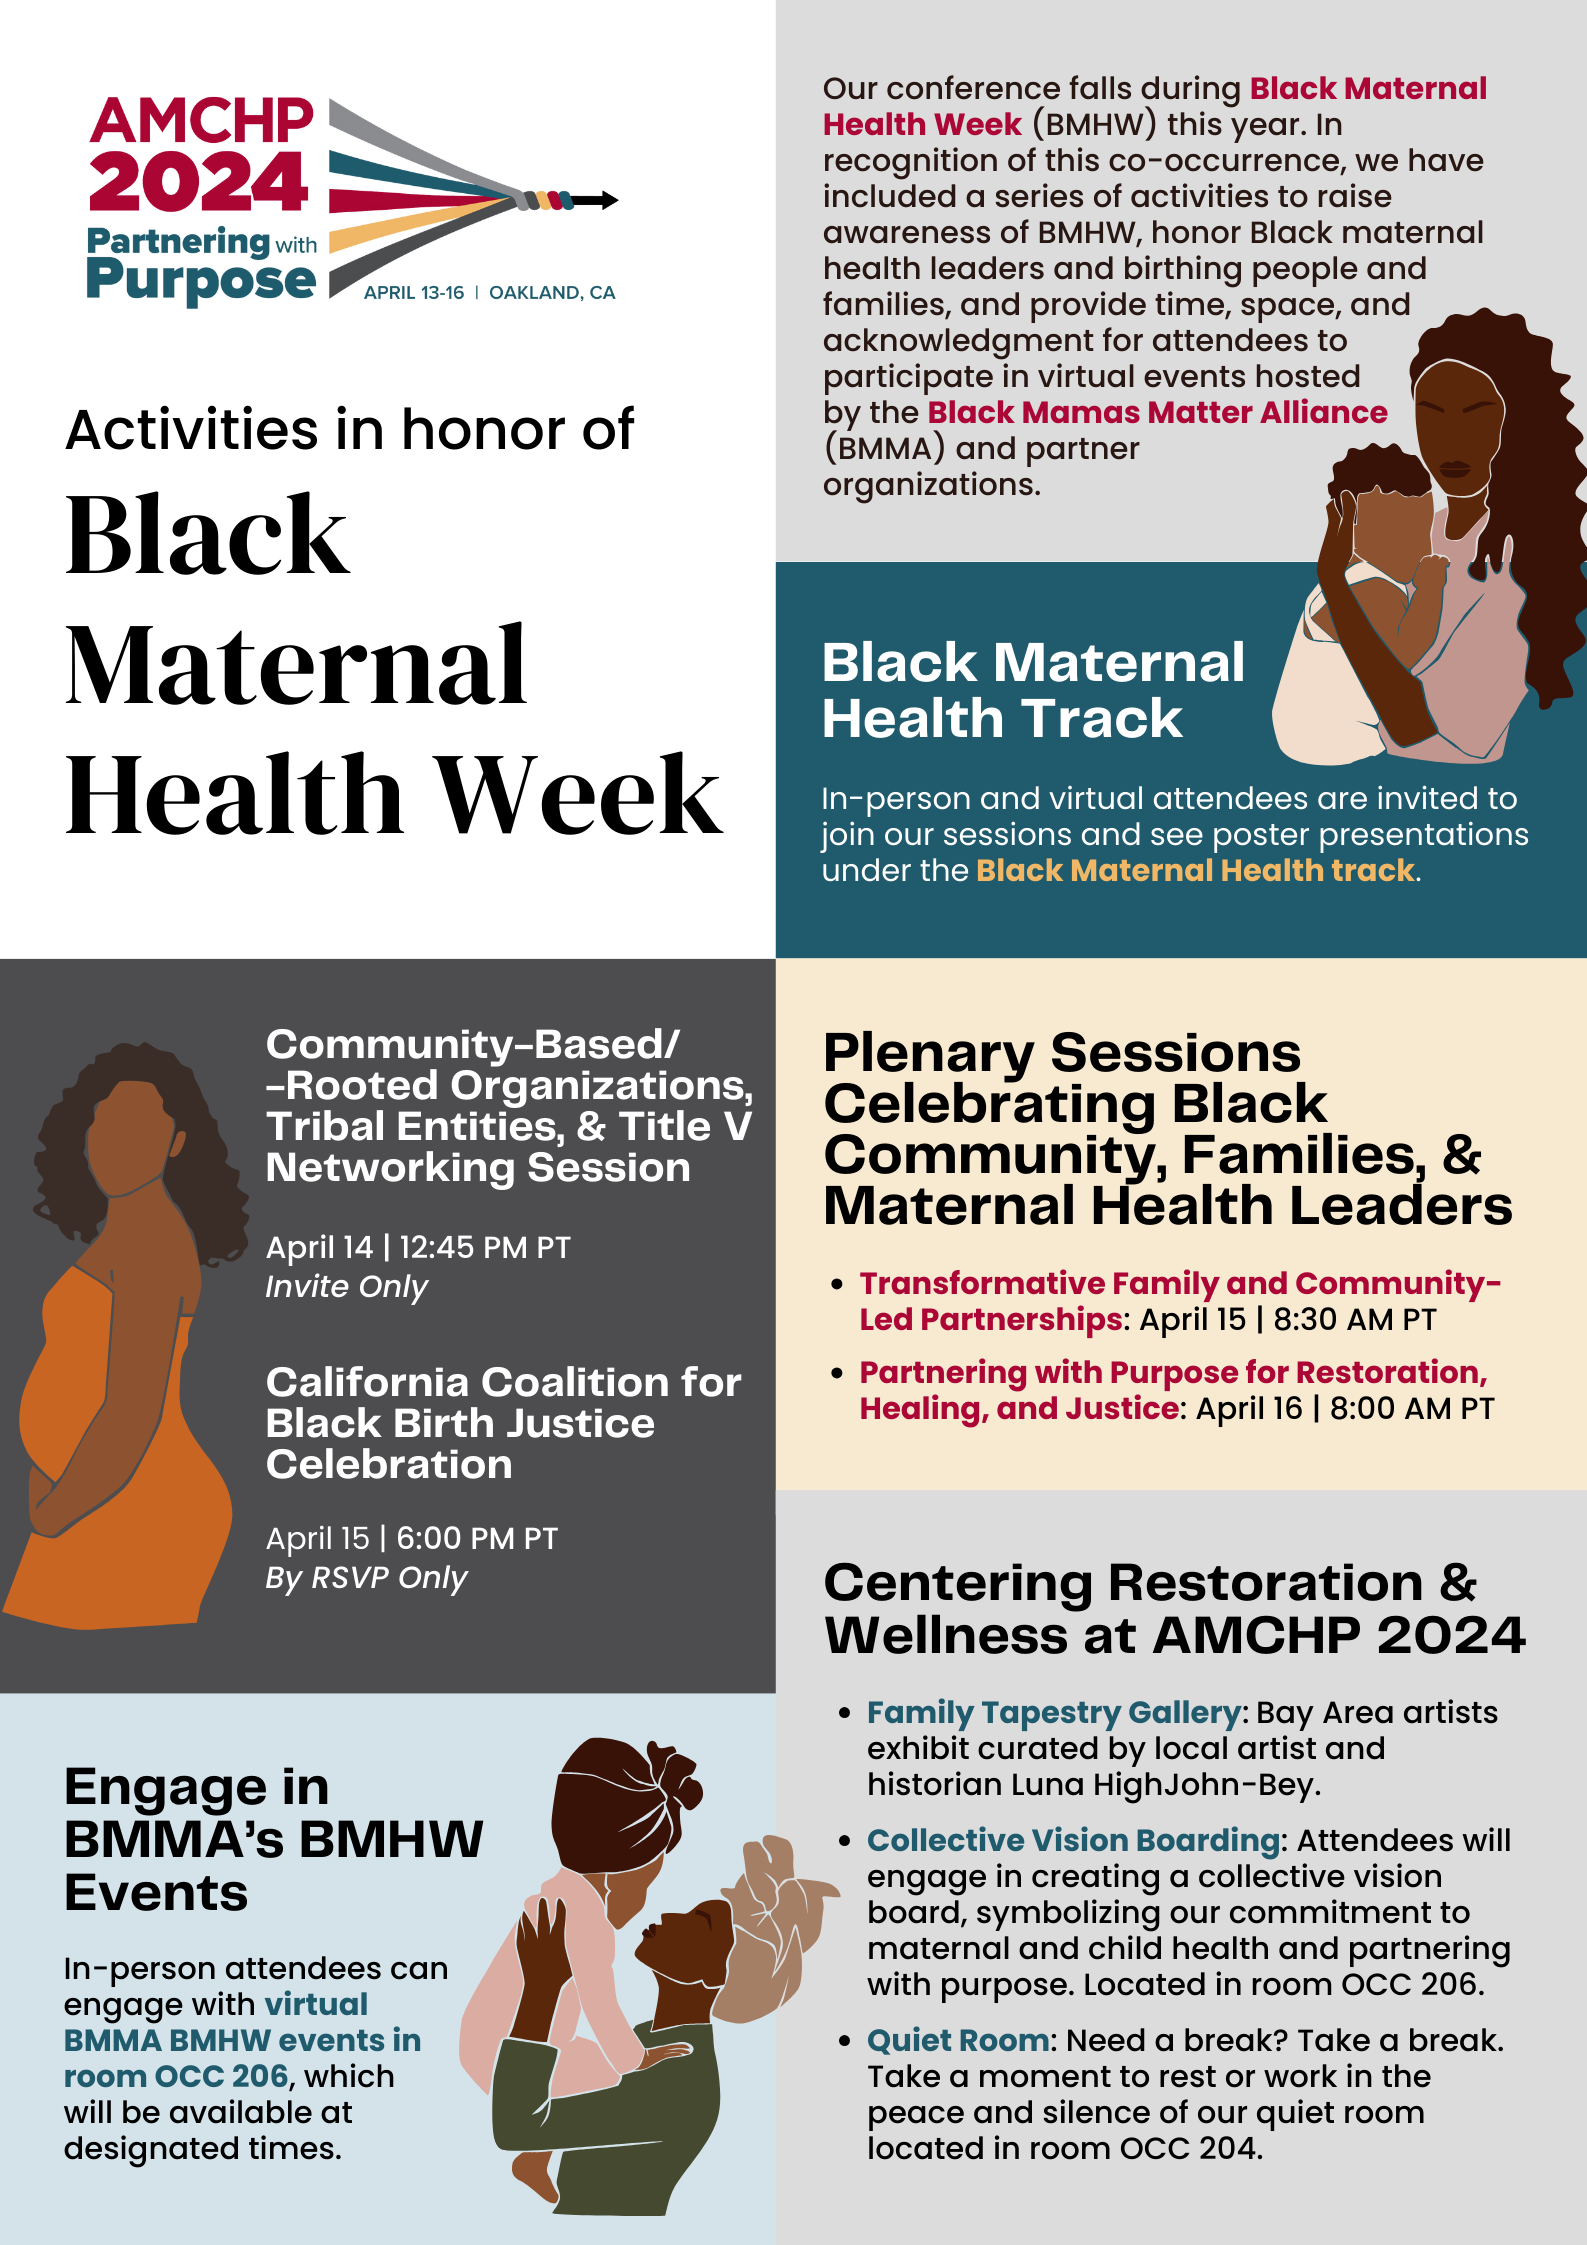 Graphic collating activities in honor of Black Maternal Health Week. More information at: https://amchp.org/wp-content/uploads/2024/03/BMHW-Flyer_31424.pdf